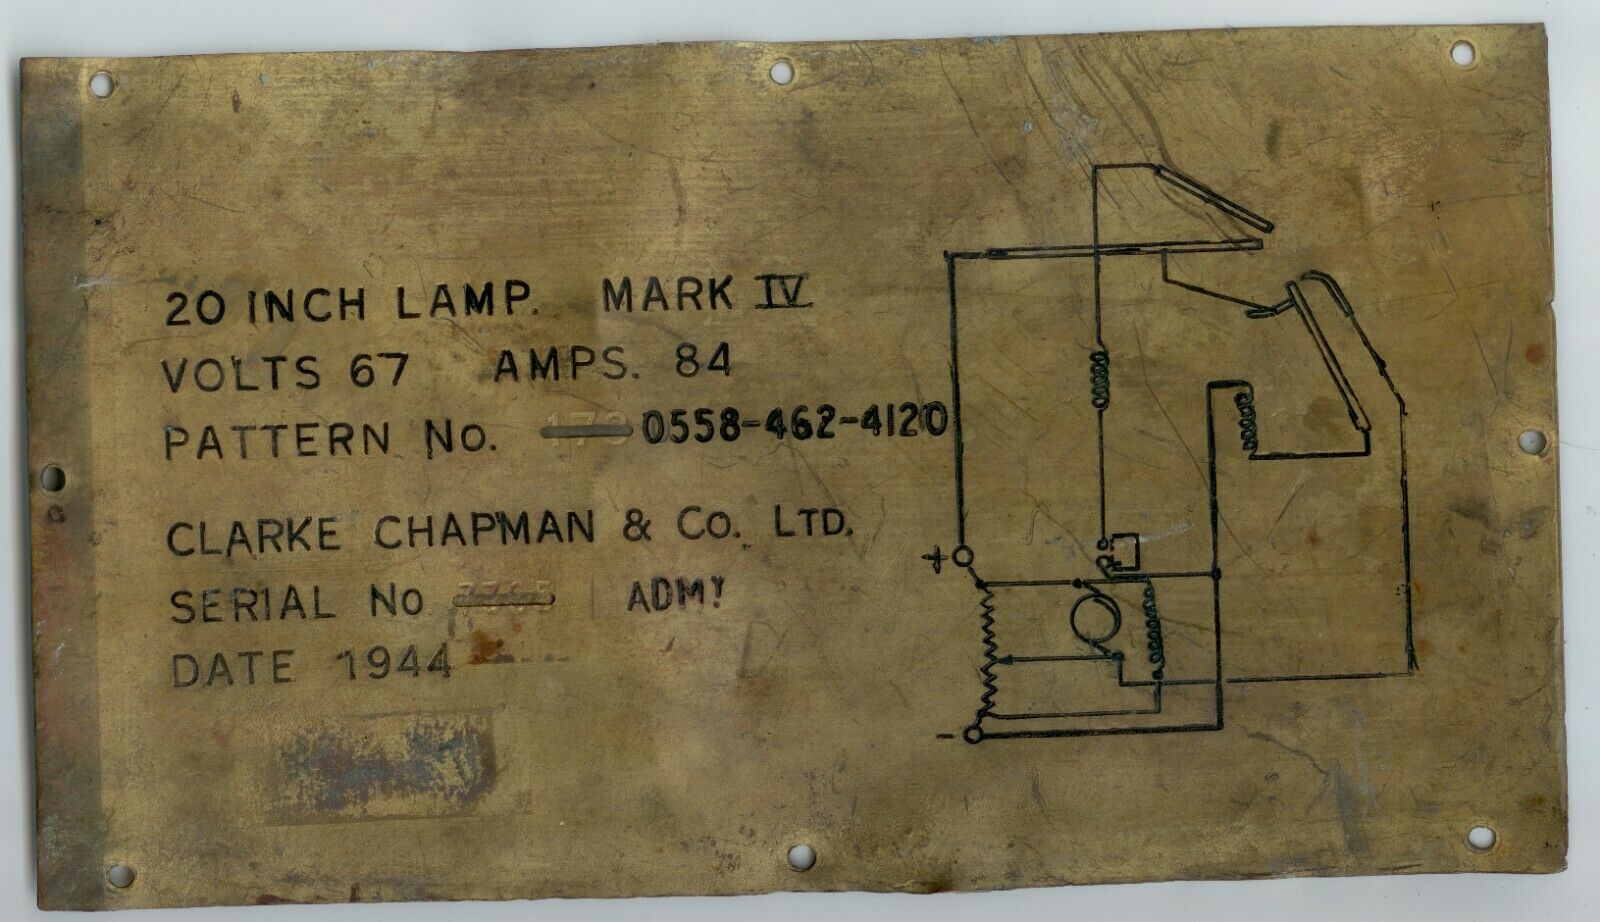 Antique Valuations: Clarke Chapman & Co 1944 WW2 20 inch Mark IV Lamp data plate flood/searchlight?